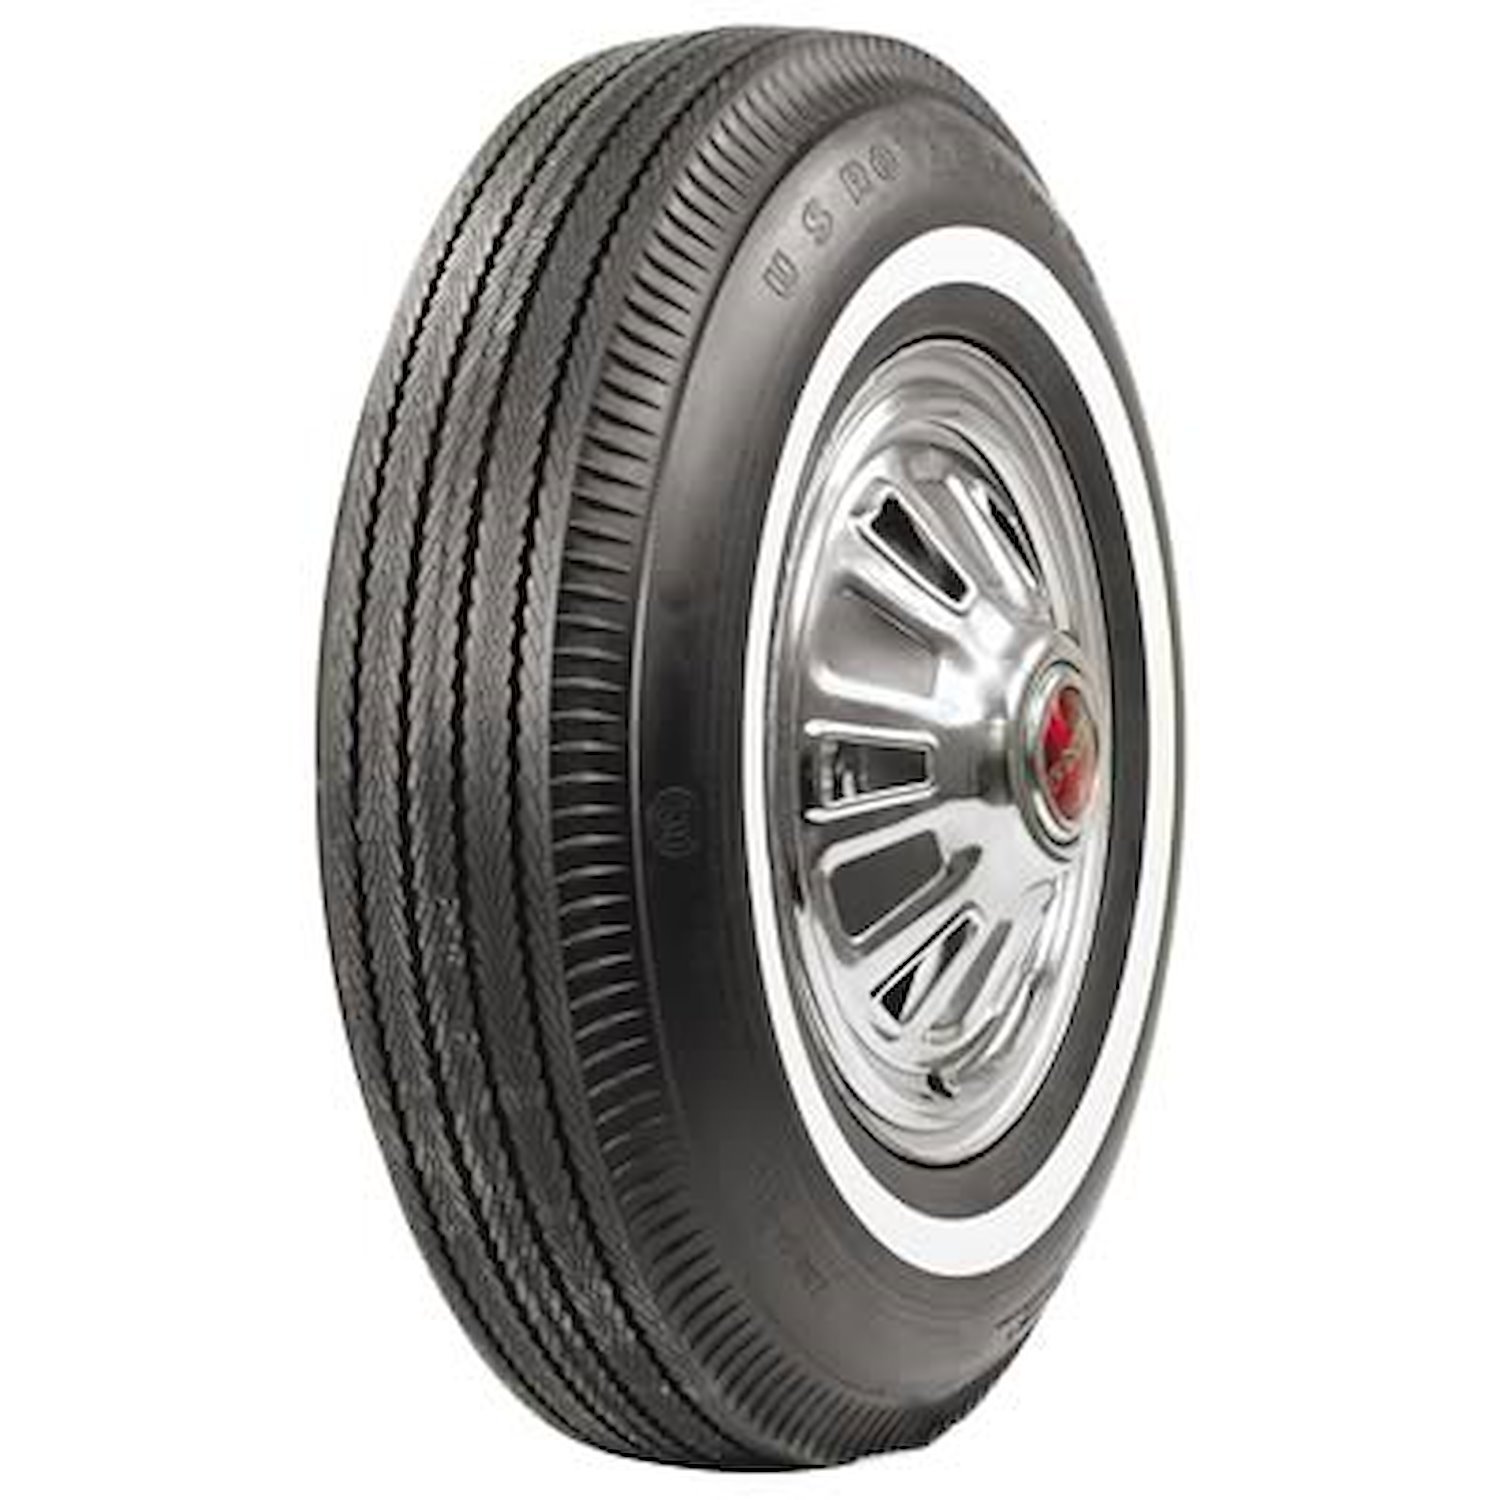 57640 Tire, US Royal 2 11/16-Inch Whitewall, 670-15